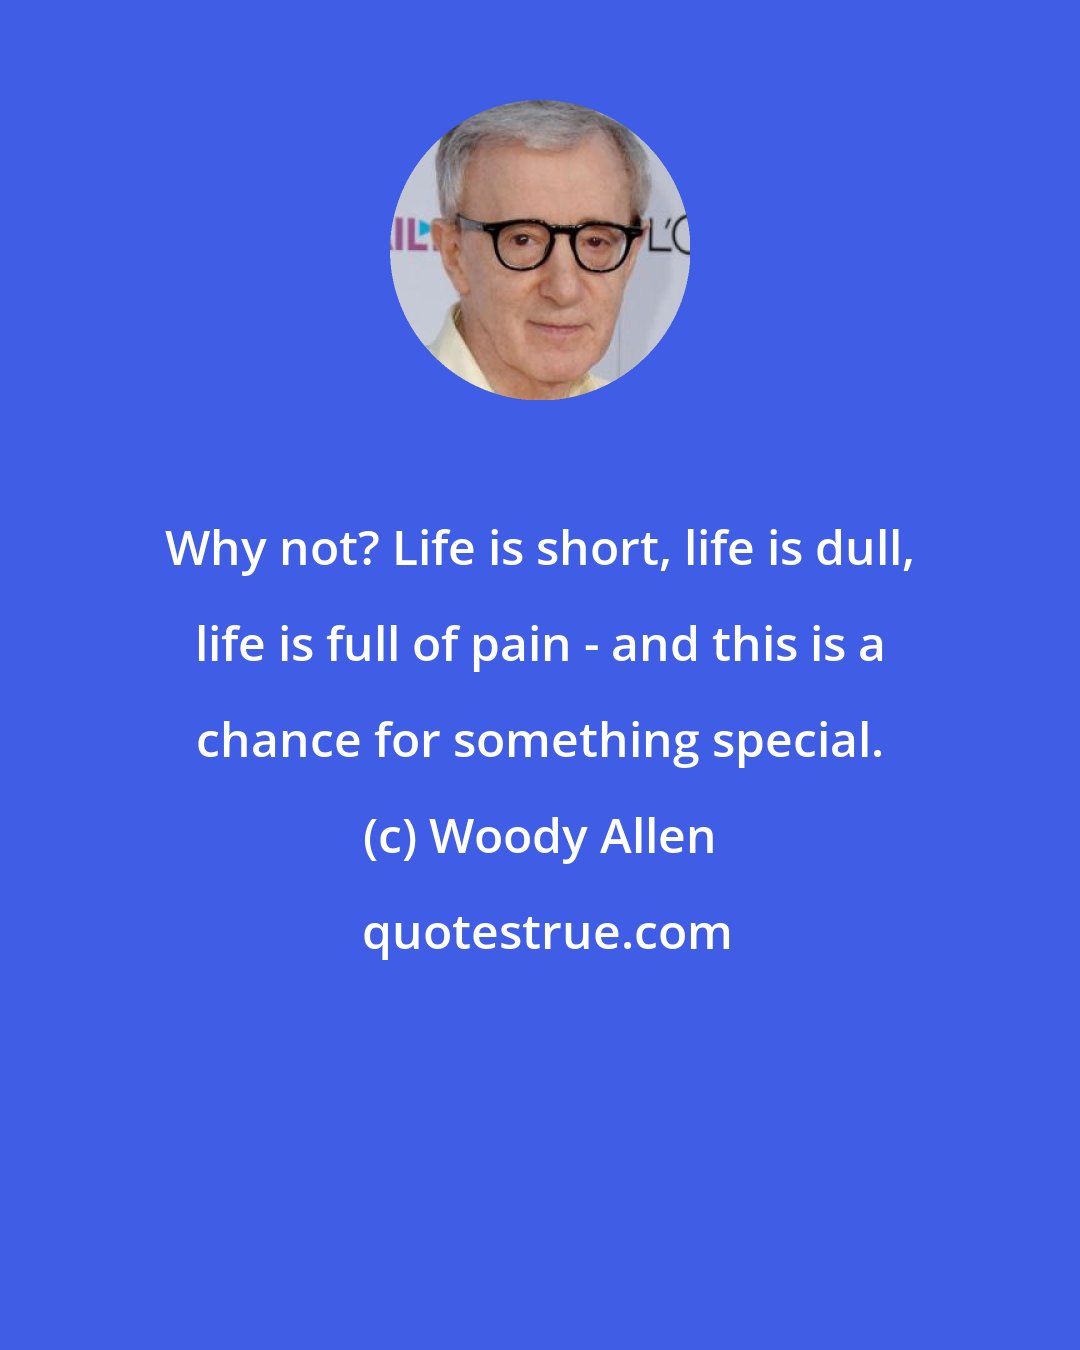 Woody Allen: Why not? Life is short, life is dull, life is full of pain - and this is a chance for something special.